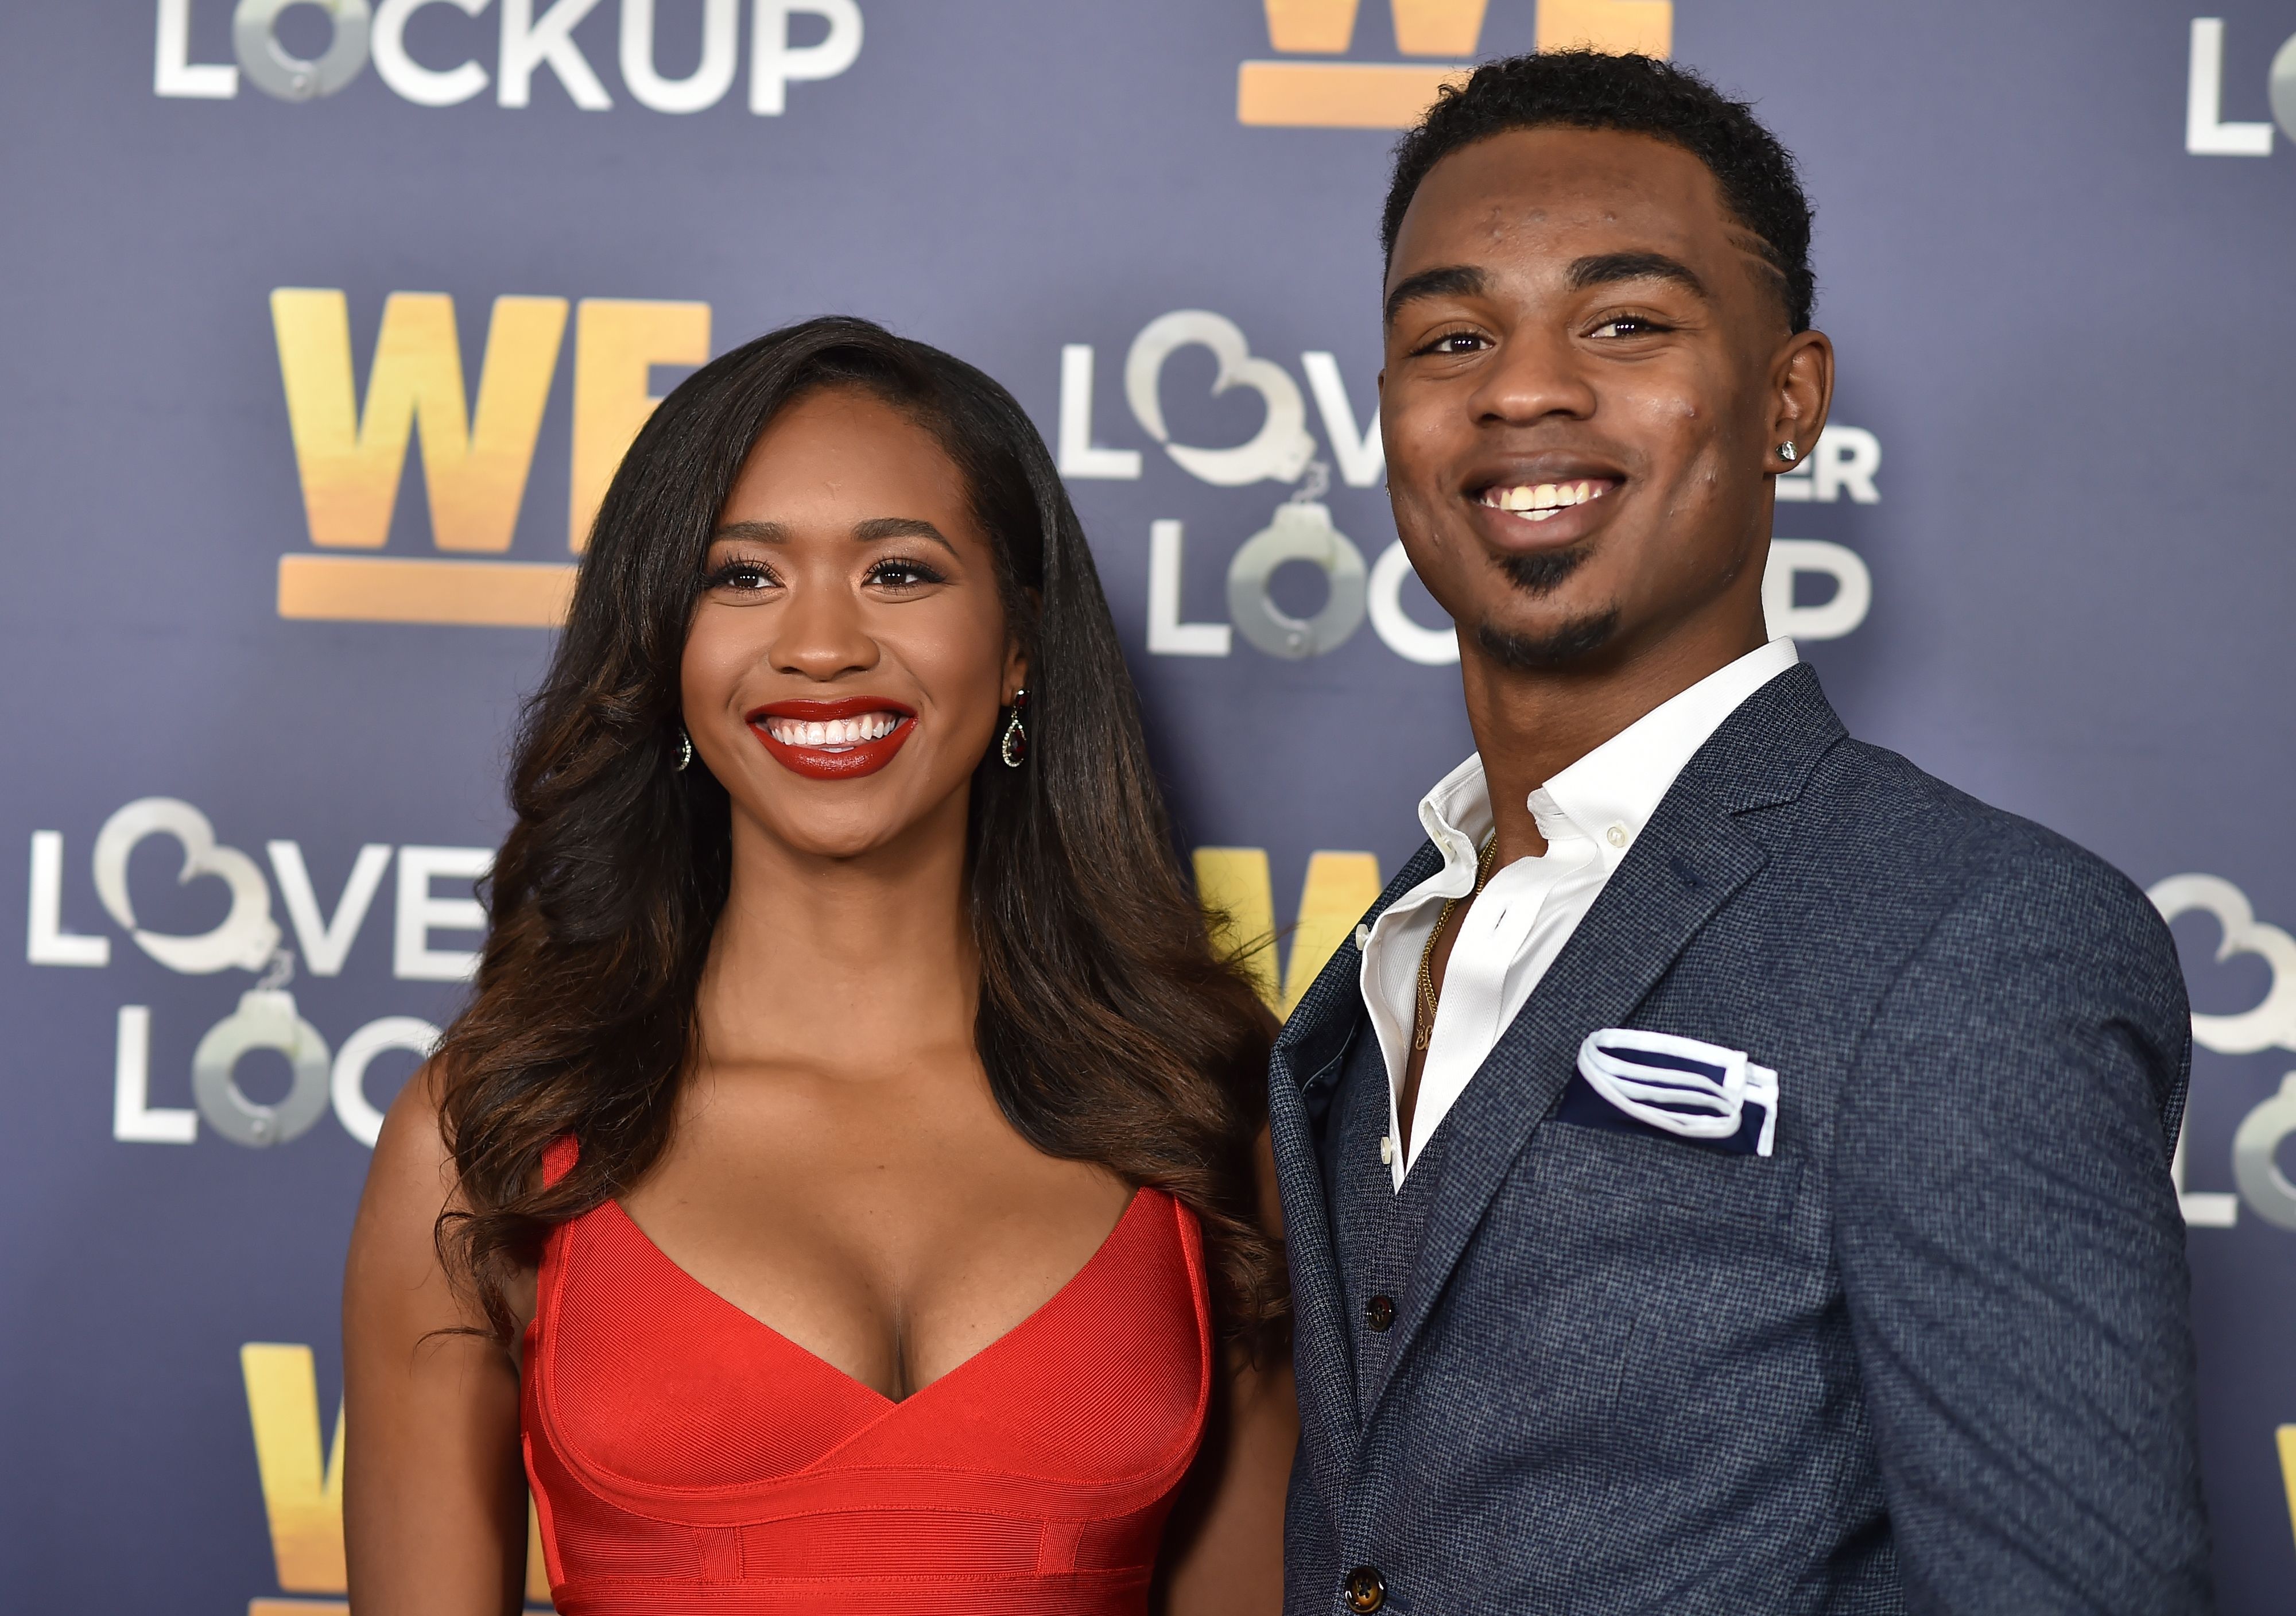 Reality television stars Chris "Swaggy C" Williams and Bayleigh Dayton standing next to each other and smiling at WE tv celebrates the return of "Love After Lockup"